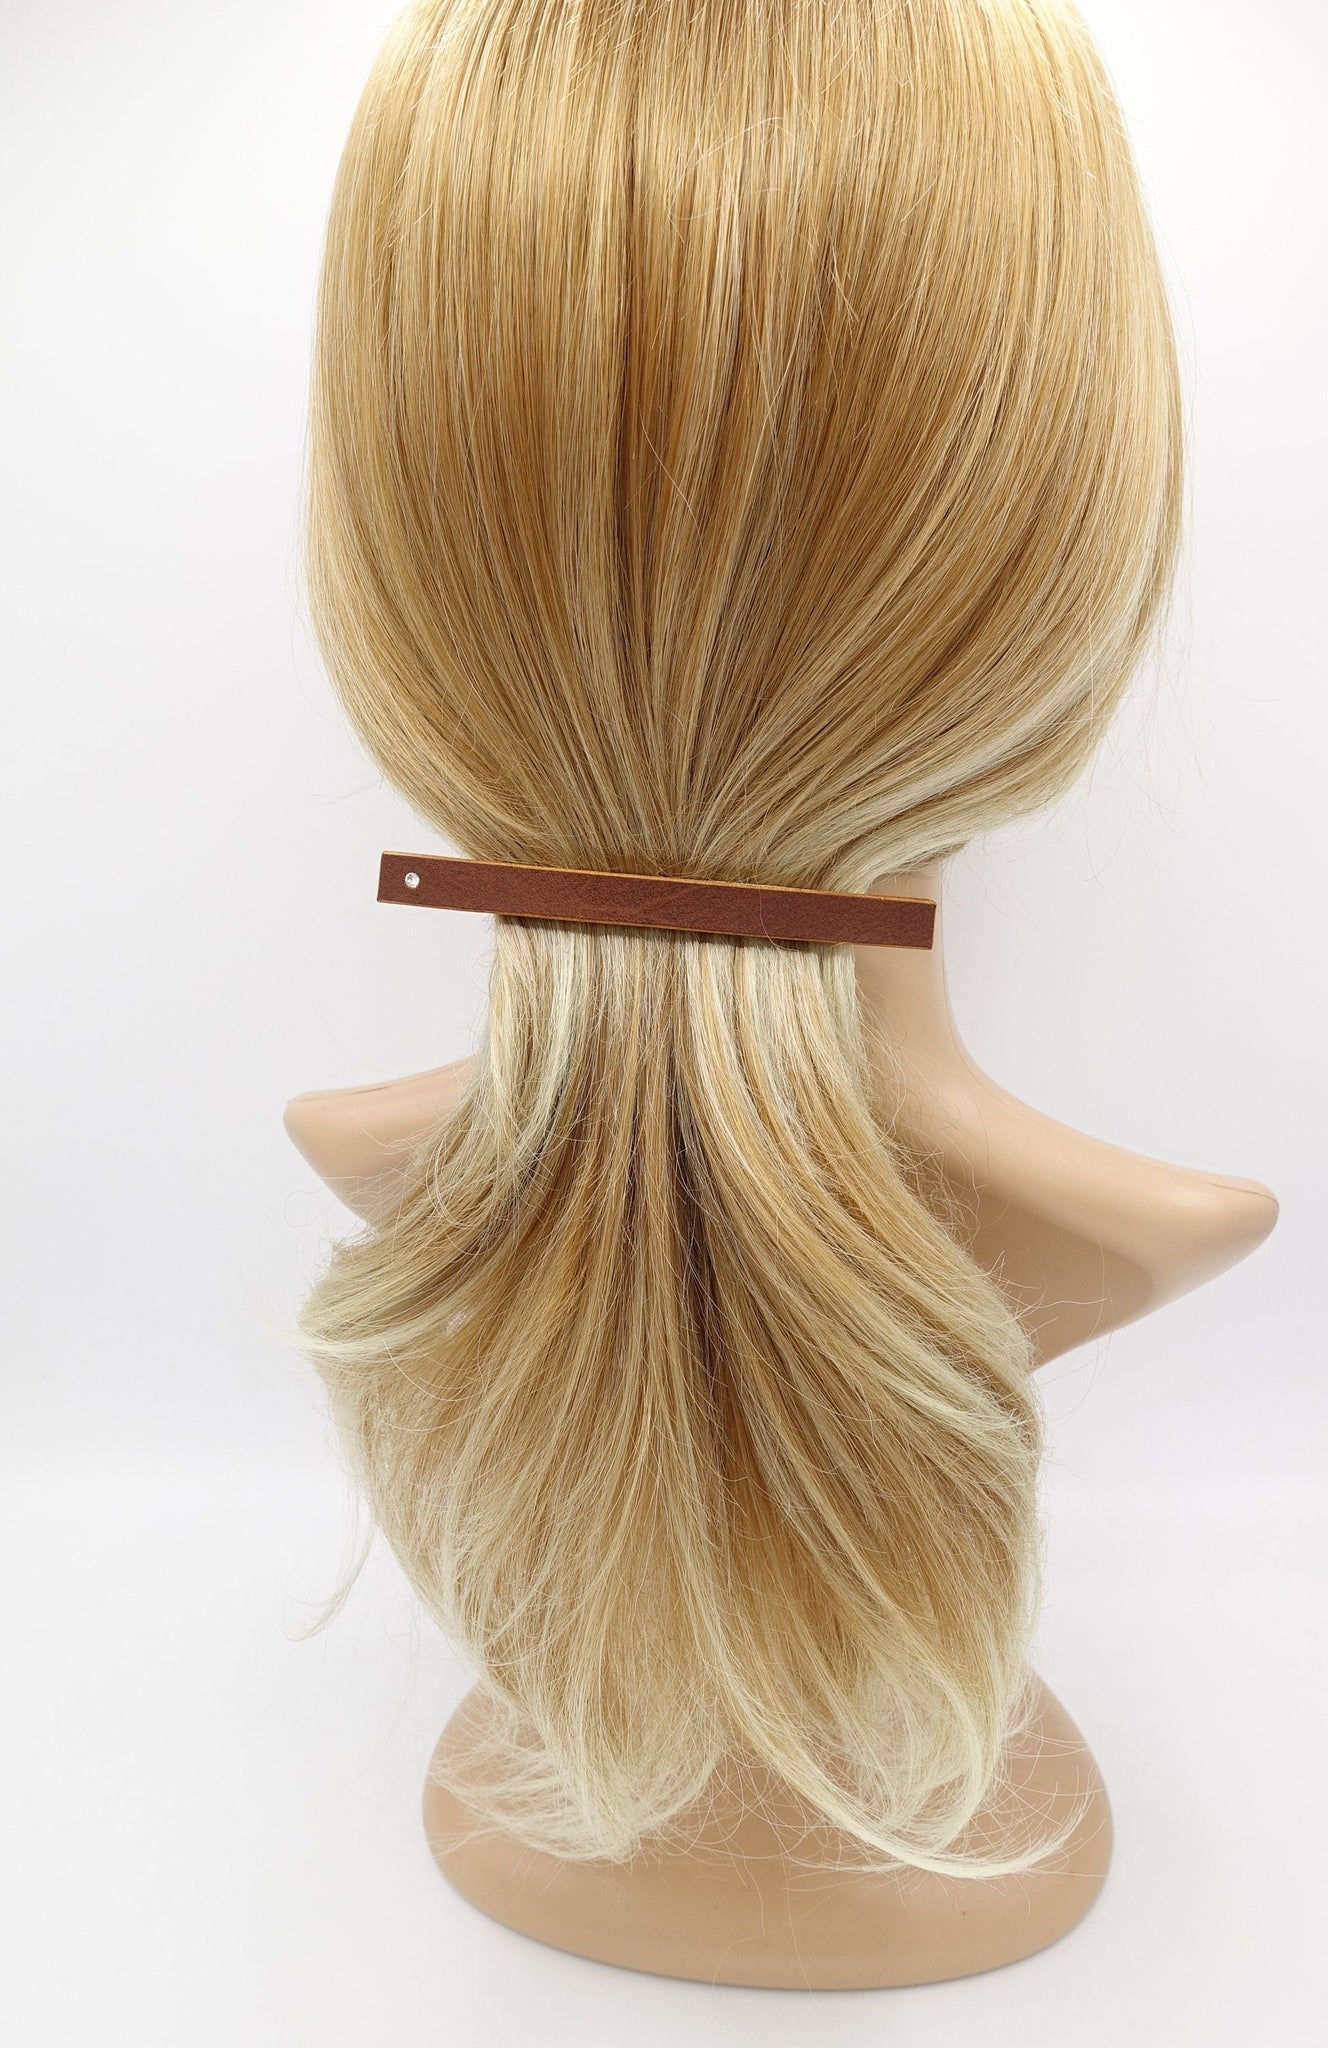 veryshine.com Barrette (Bow) Brown leather hair barrette, narrow leather barrette, rhinestone hair barrette for women